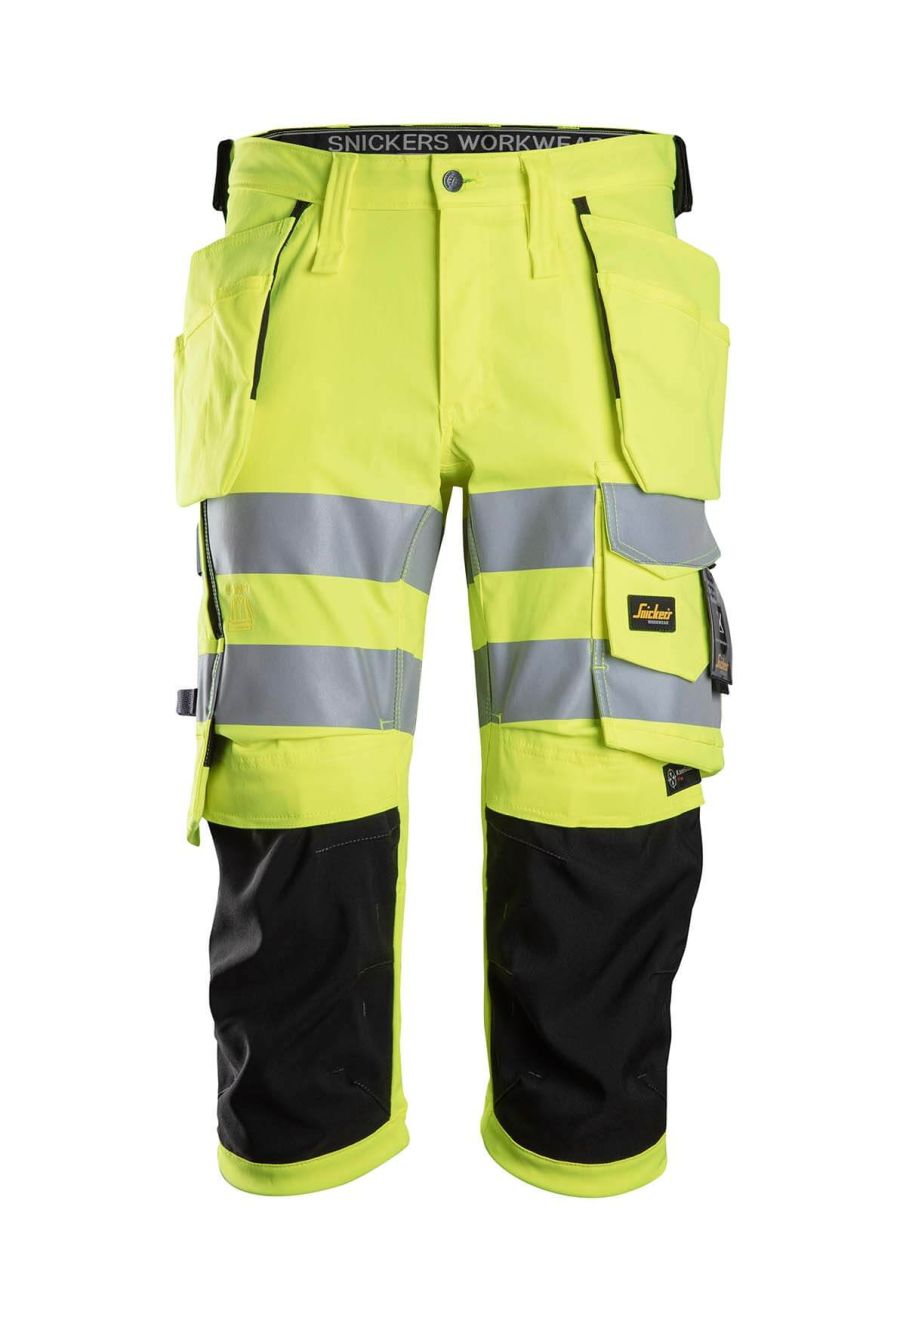 Work pants - 6619 series - Snickers Workwear AB - high-visibility /  polyester / polyamide